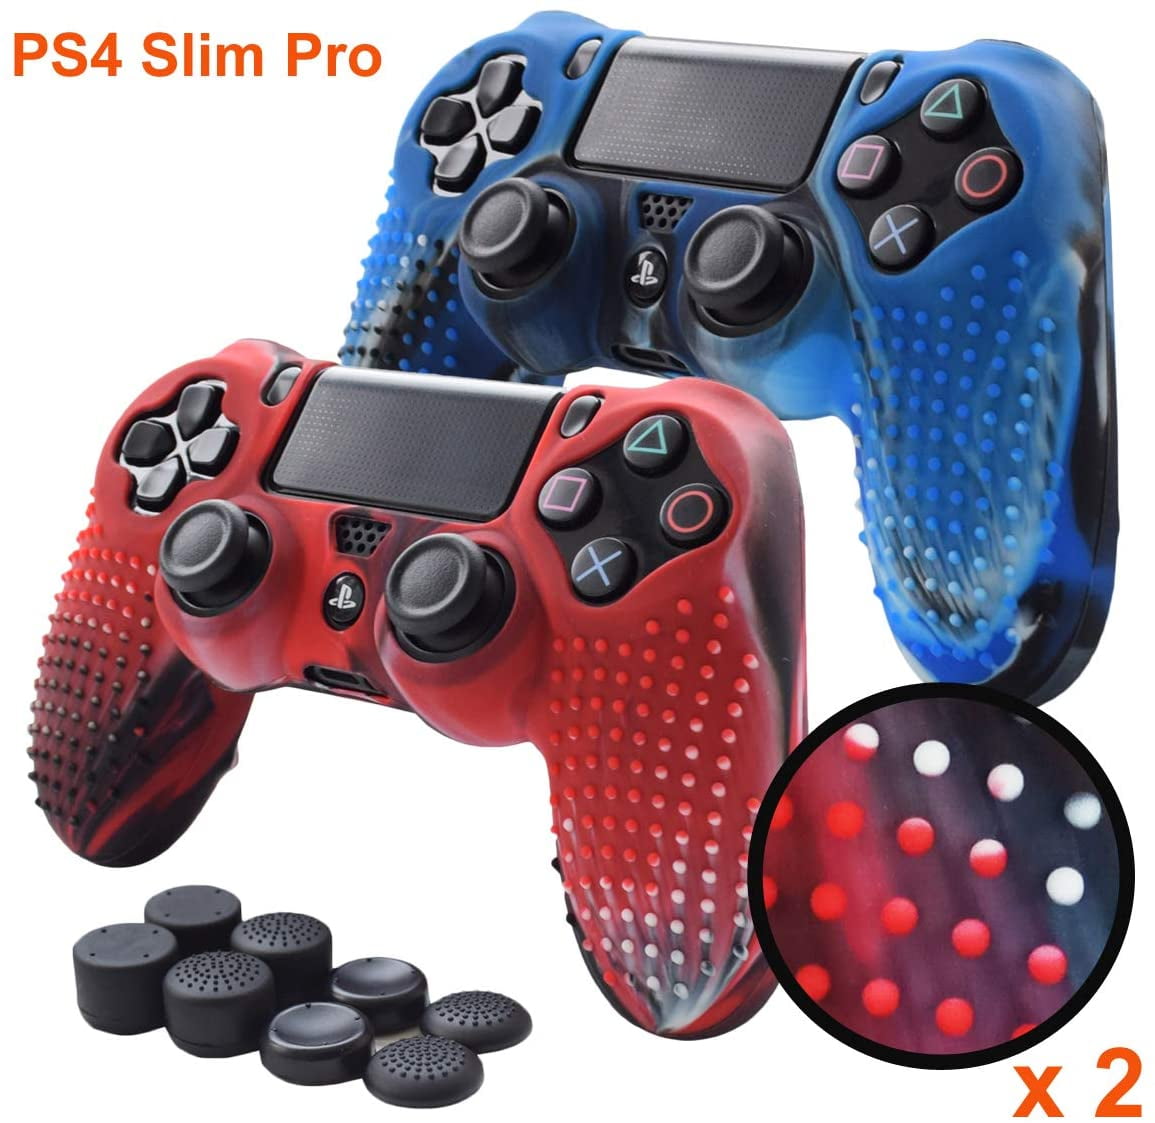 8pcs Pro Thumb Grips-Studs Blue One Light Bar Sticker PS4 Controller Skin,Silicone Grips for Playstation 4 PS4/Slim/Pro Controller Anti Slip Cover Case Protector for Dual Shock 4 Controller